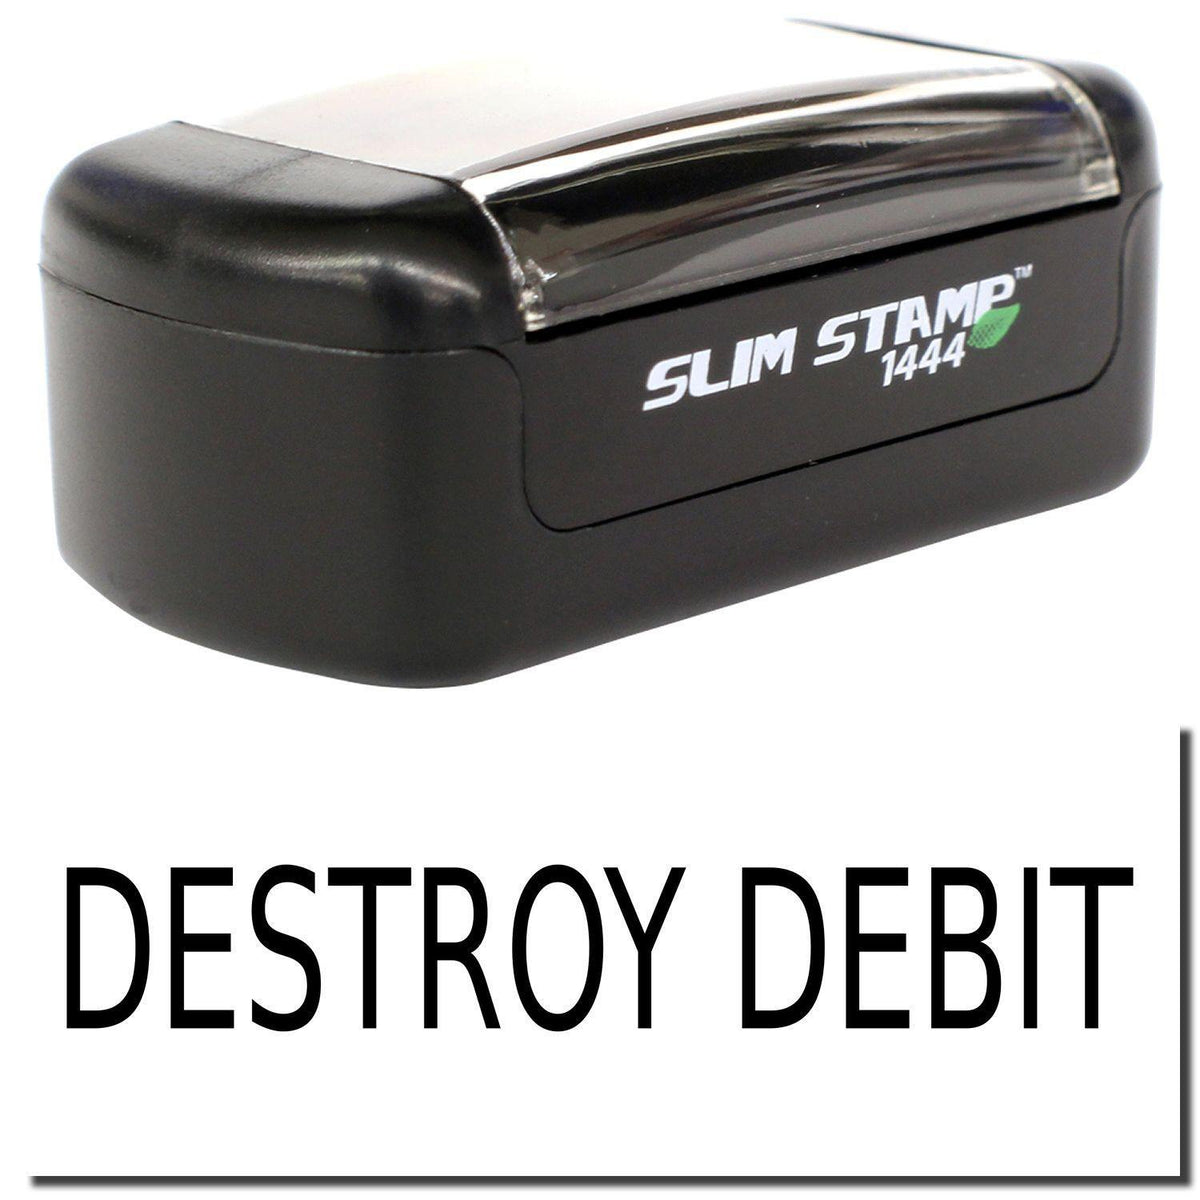 A stock office pre-inked stamp with a stamped image showing how the text &quot;DESTROY DEBIT&quot; is displayed after stamping.